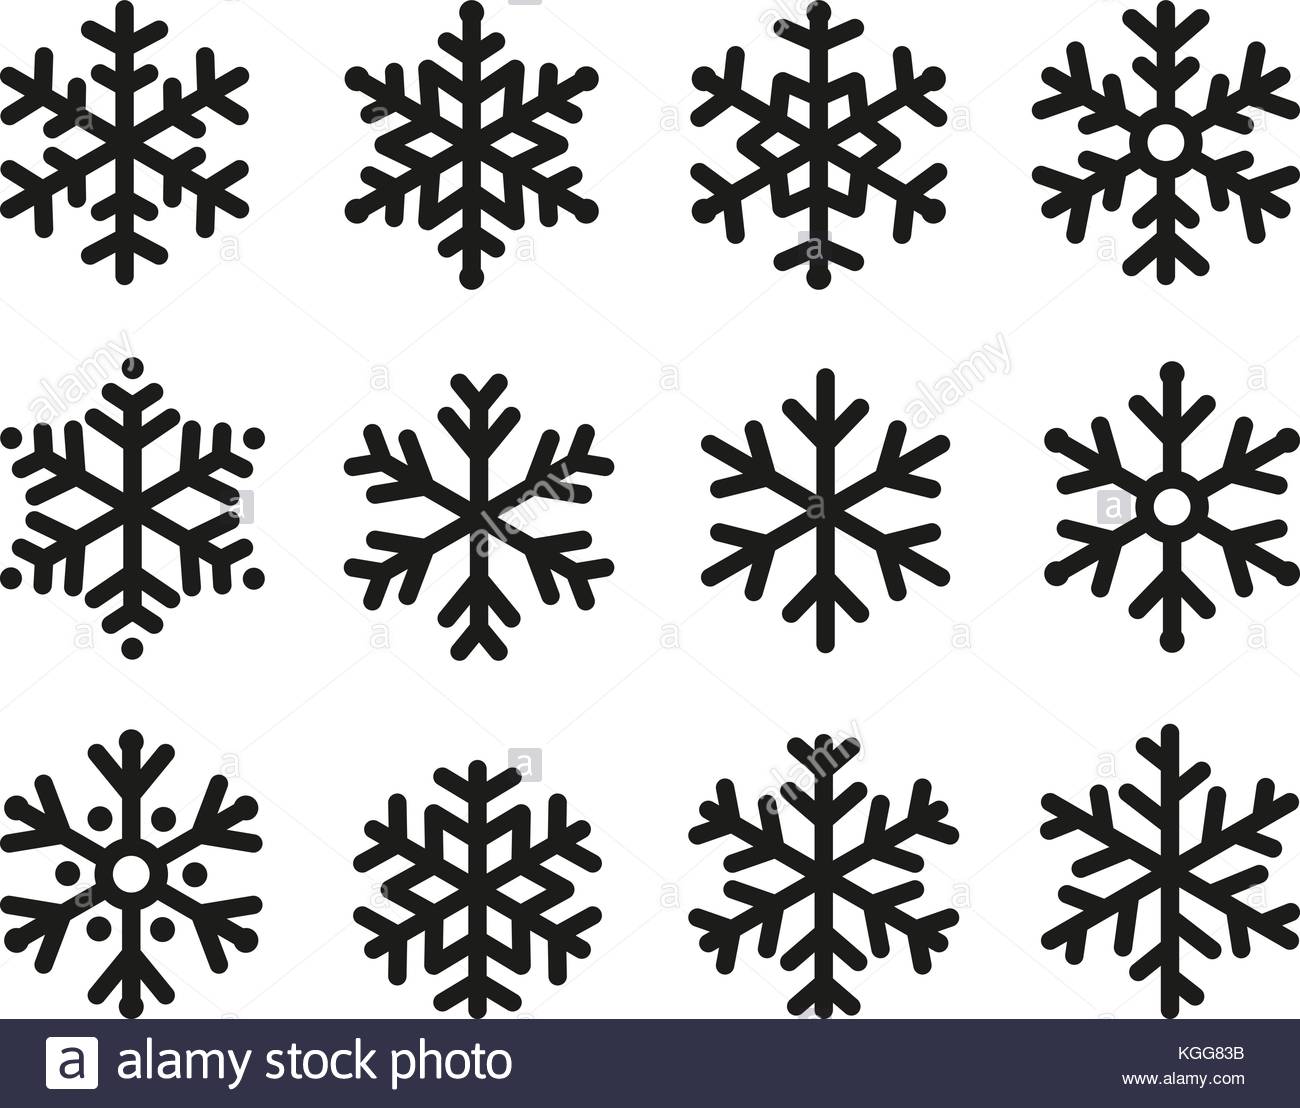 20 snowflakes icon packs - Vector icon packs - SVG, PSD, PNG, EPS 